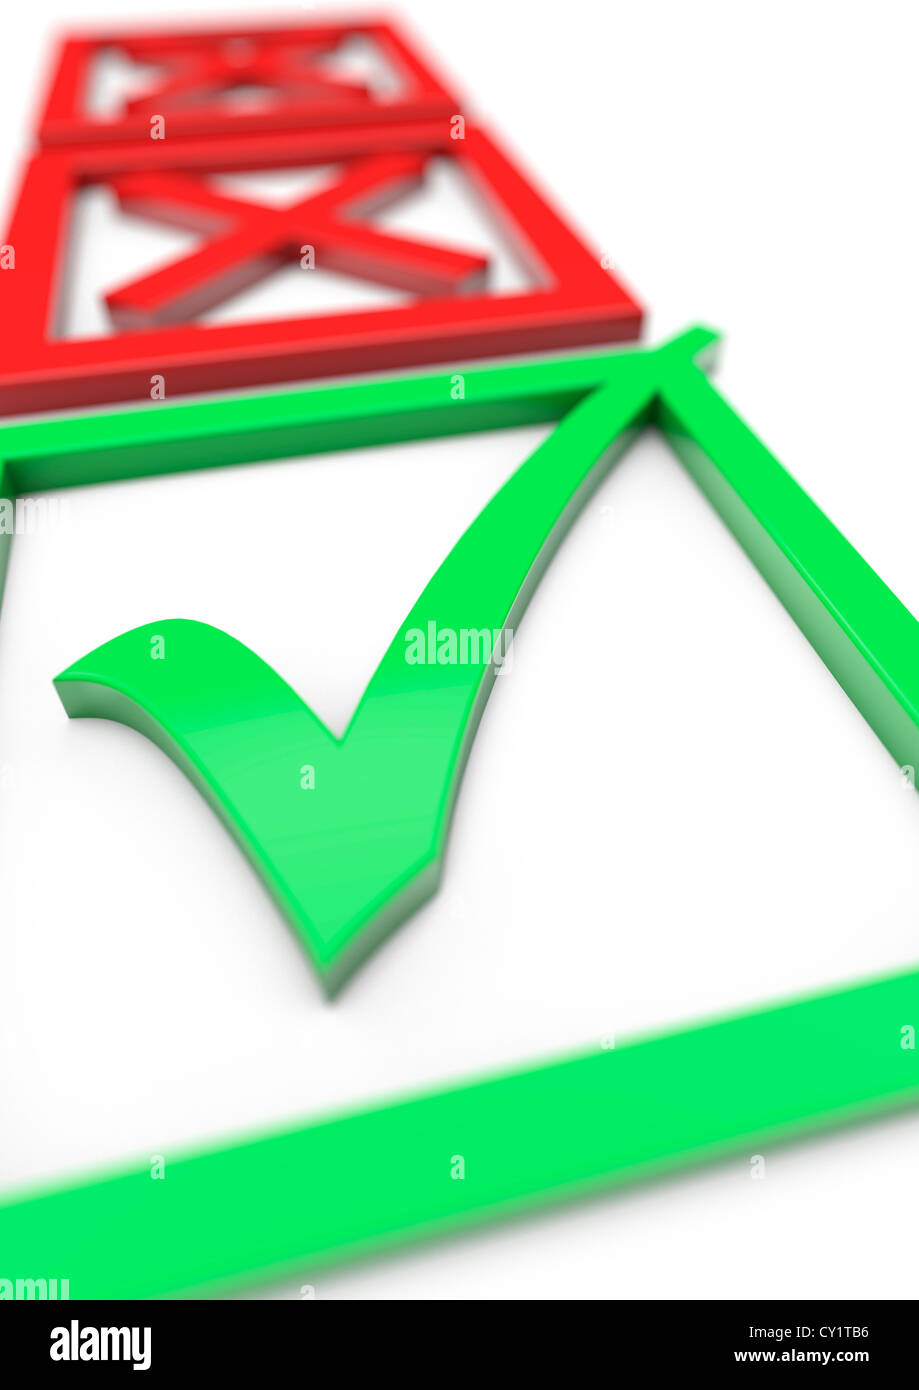 3D render of a filled in Voting slip with two red crosses in the background and a green tick in the foreground - Concept image Stock Photo